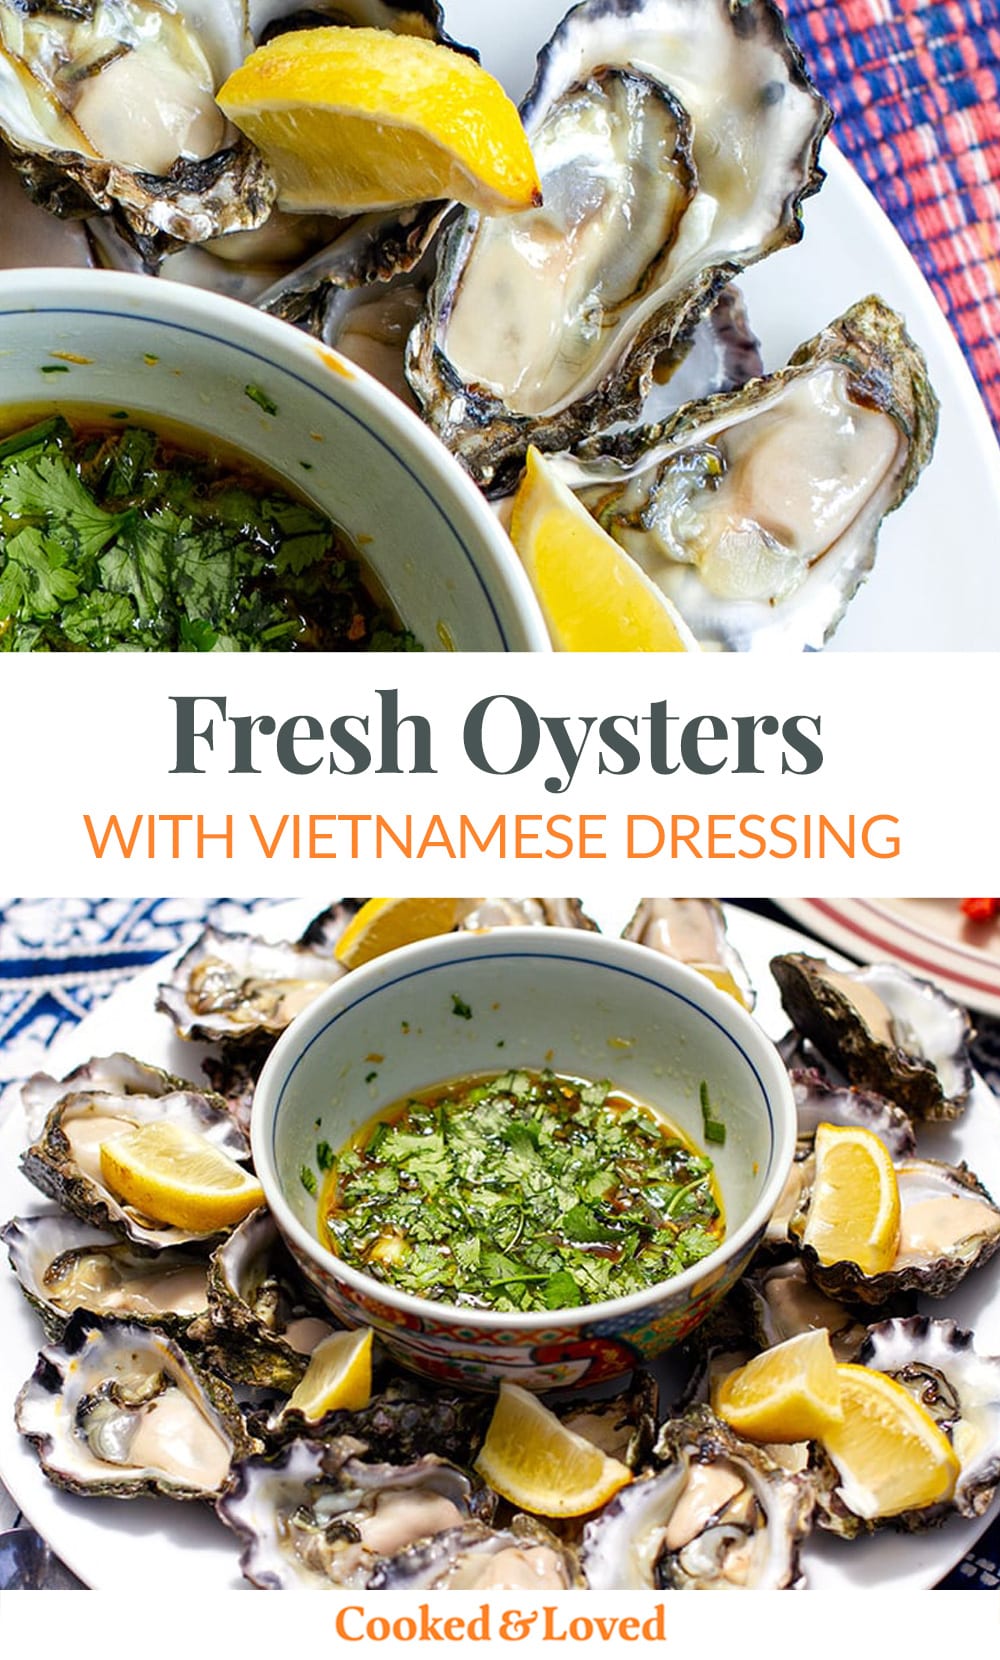 Oysters With Vietnamese Dressing